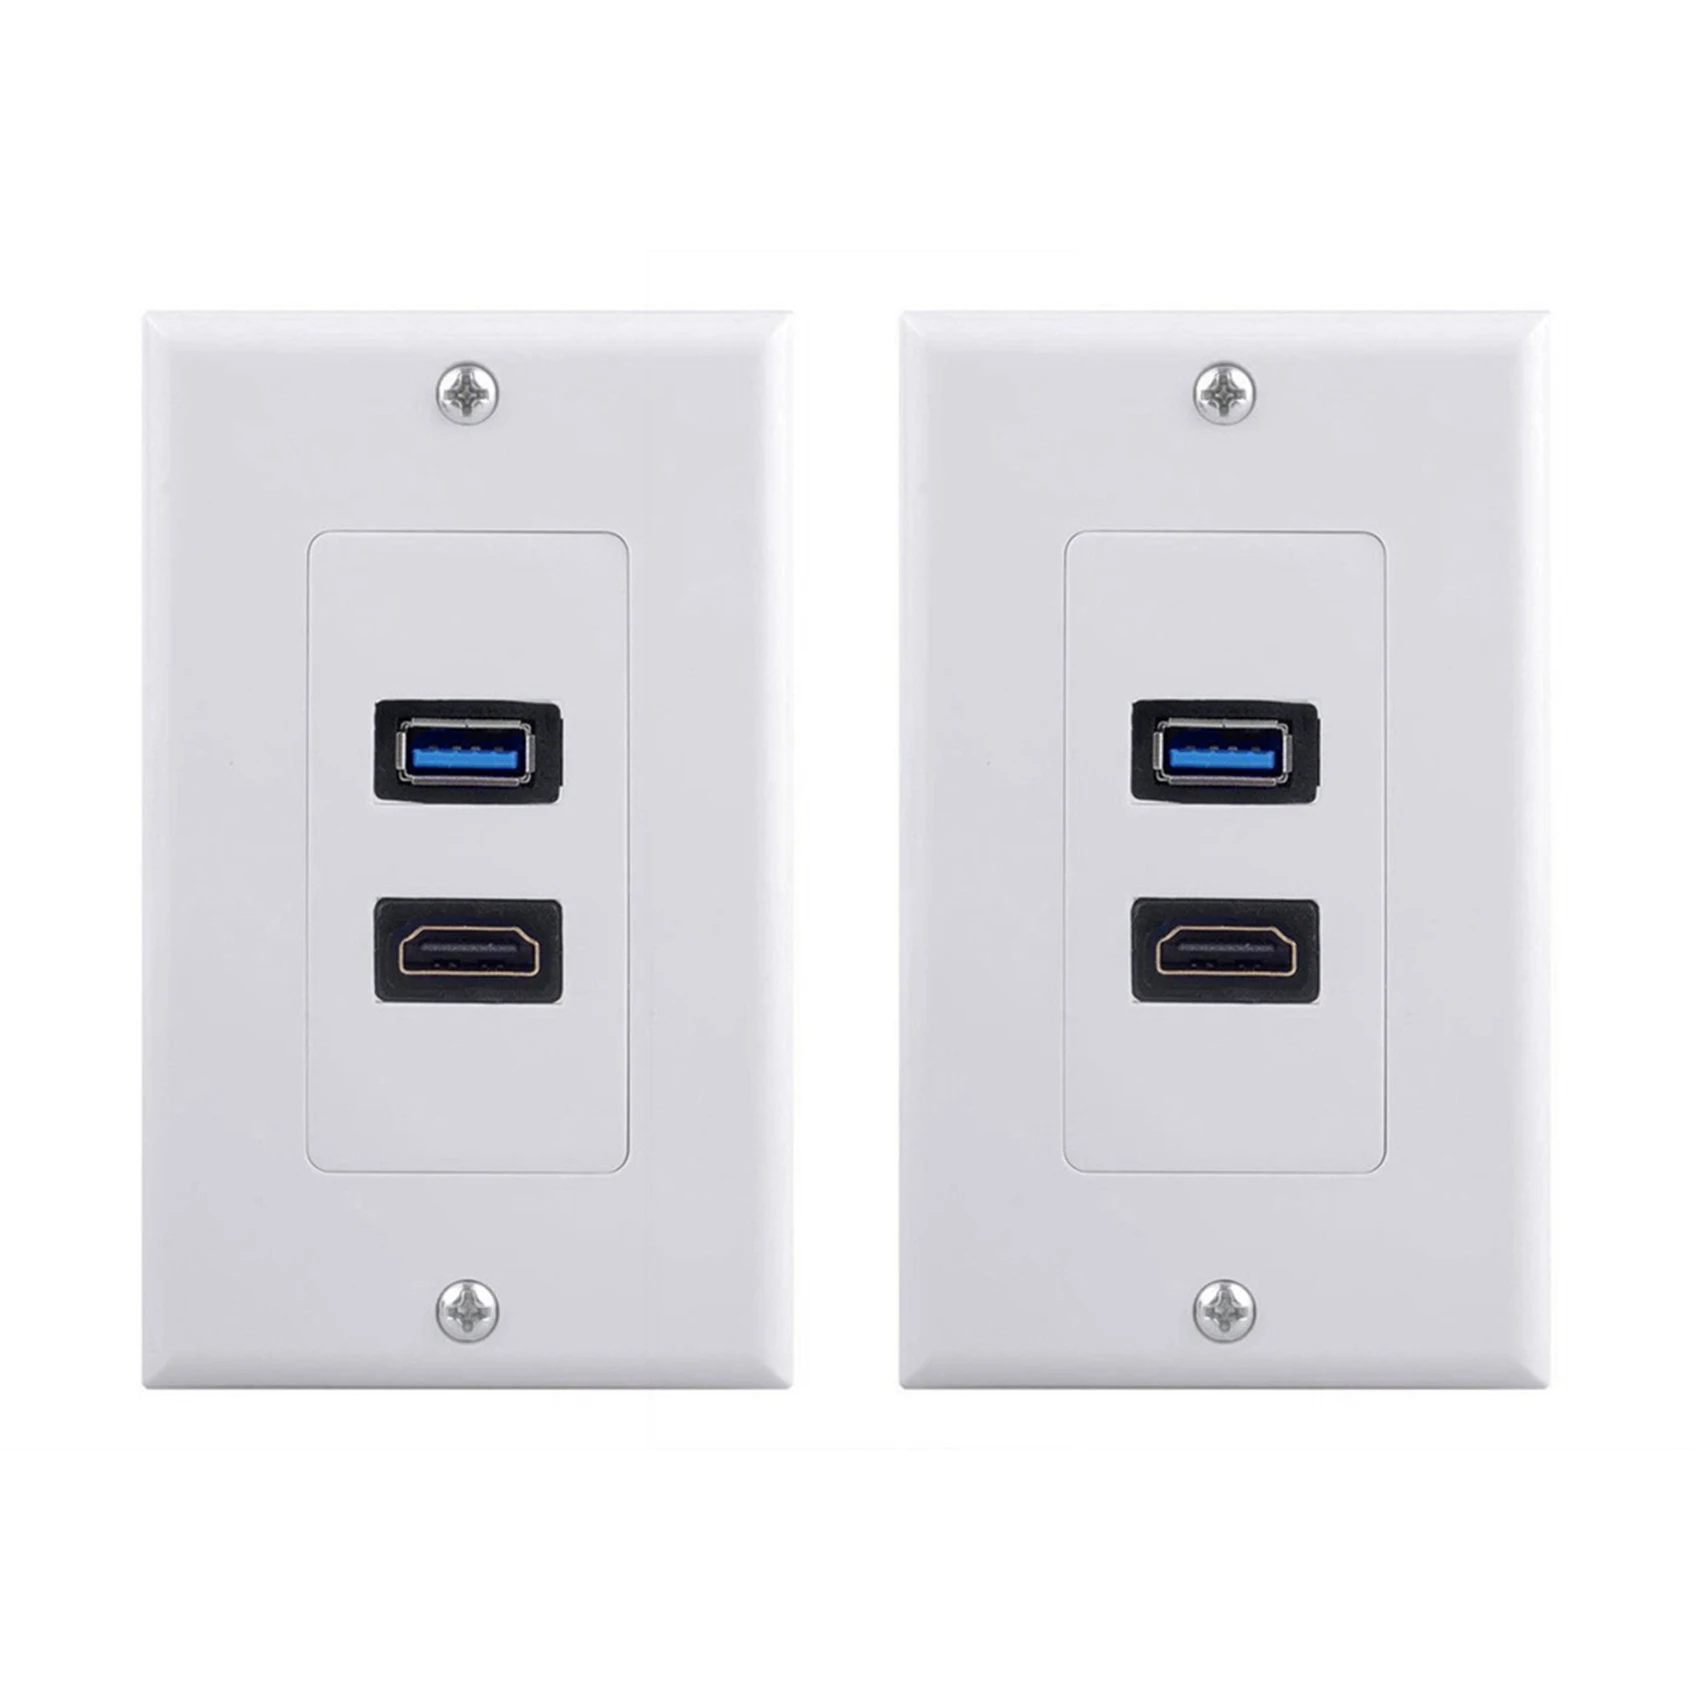 

3X 2Port HDMI+USB 3.0 Female Wall Face Plate Panel Outlet Socket Extender White